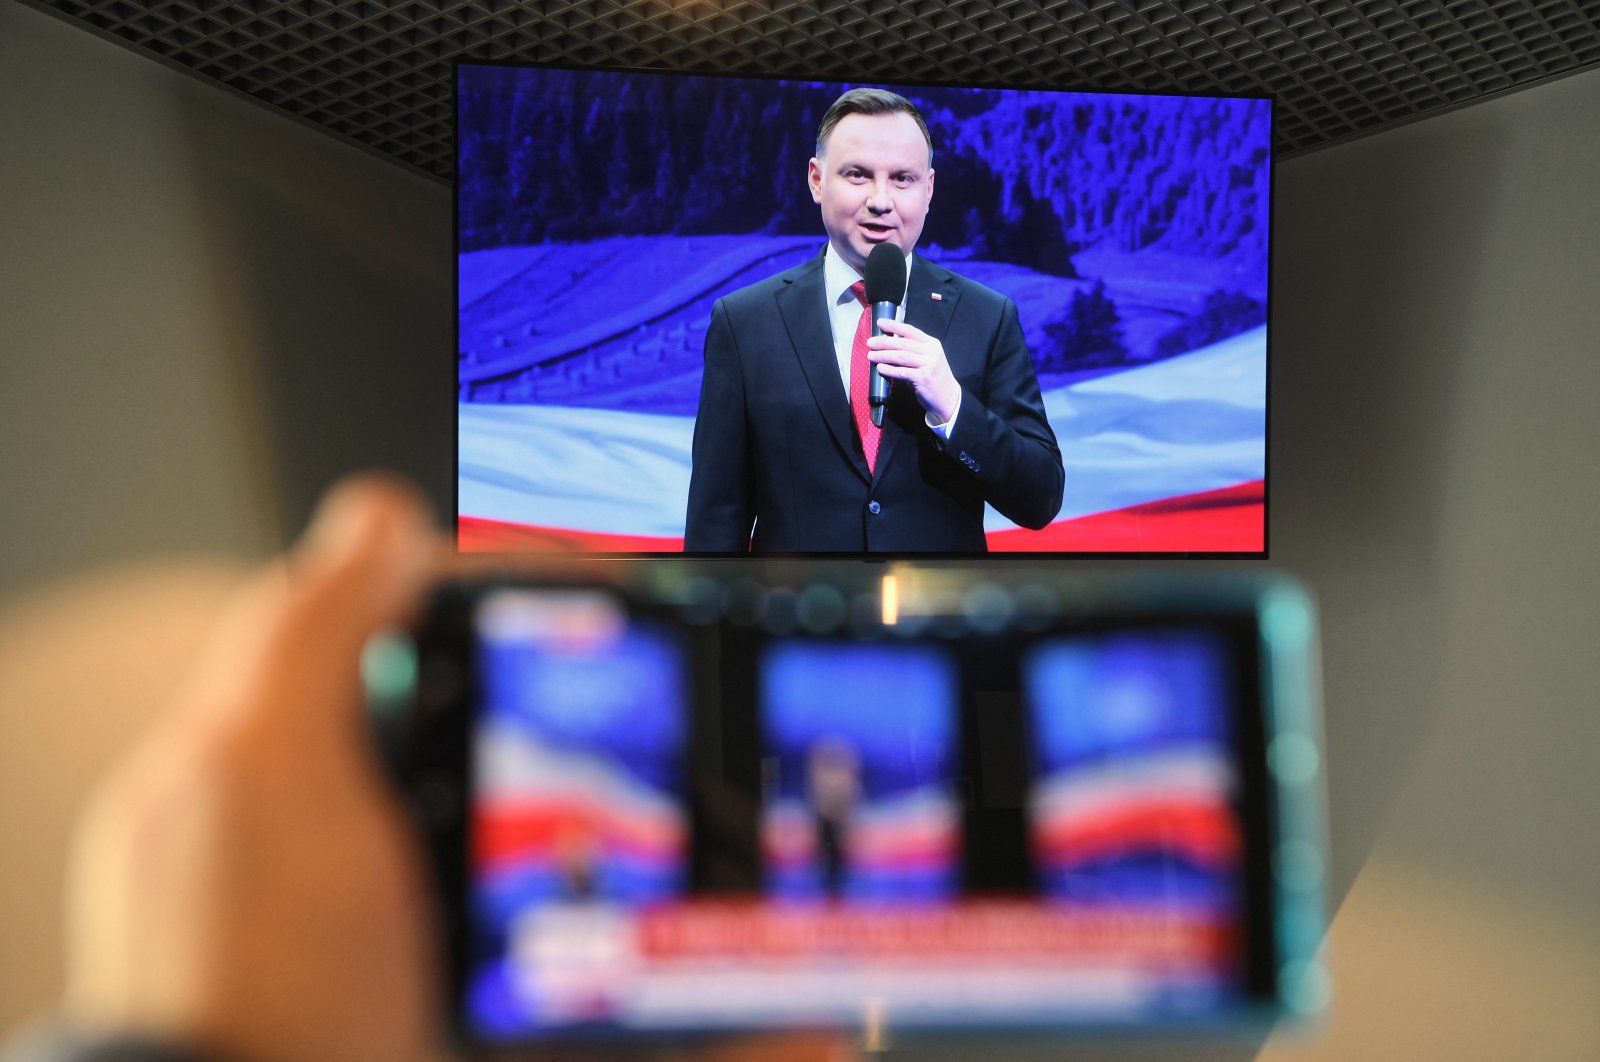 A television screen shows Polish President Andrzej Duda during the broadcast from the program convention in the village of Szeligi, Poland on May 1, 2020. (EPA Photo)